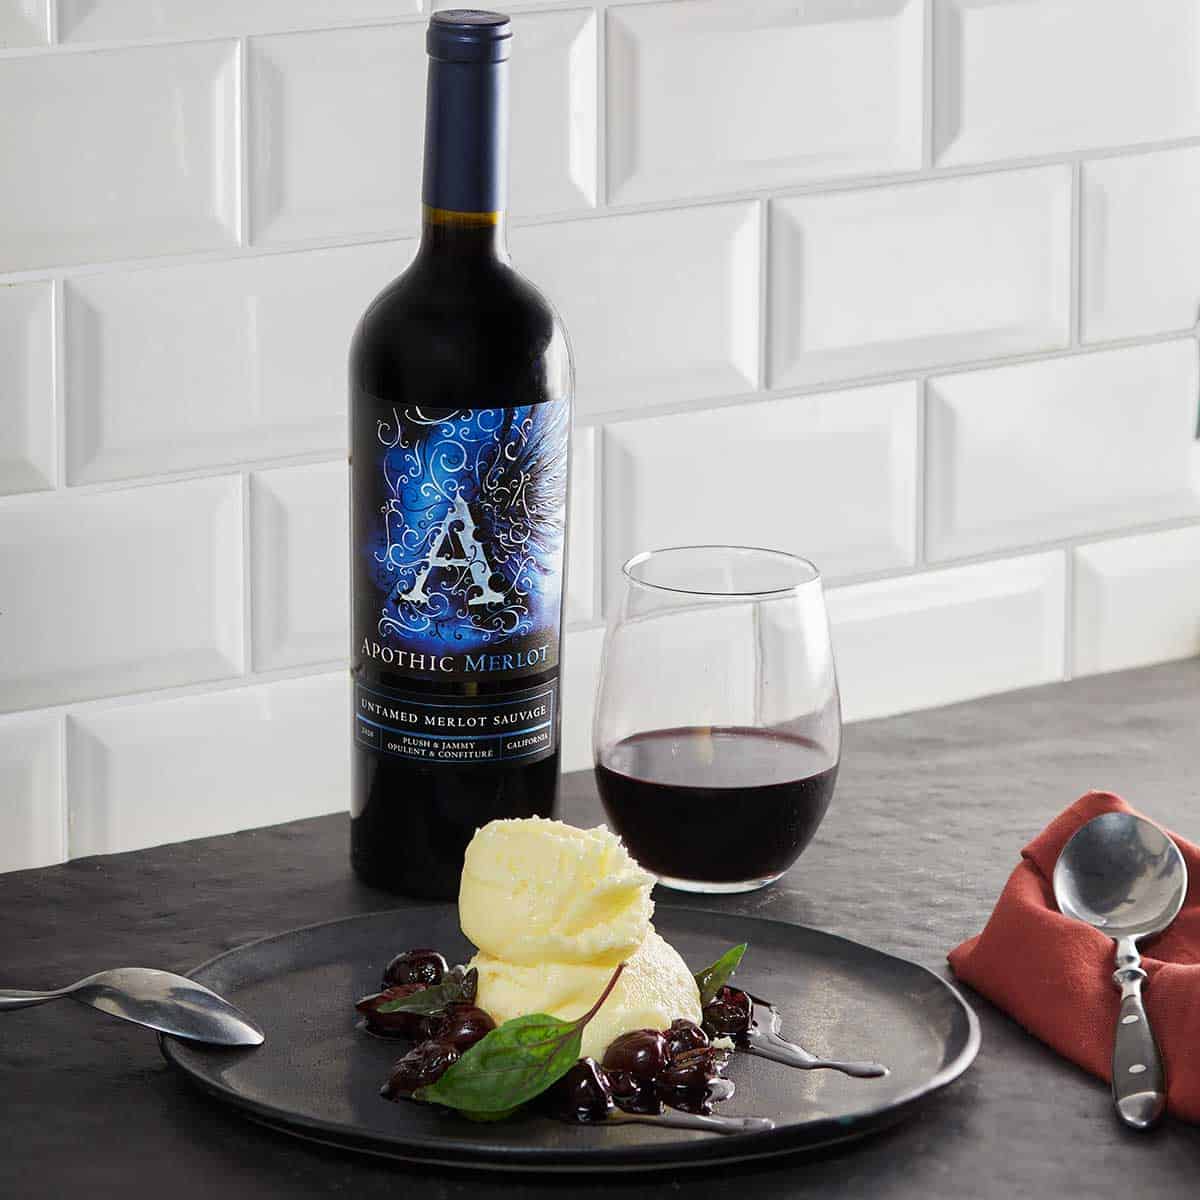 A vanilla ice cream and cherry plate in front of a glass and a bottle of Apothic Merlot